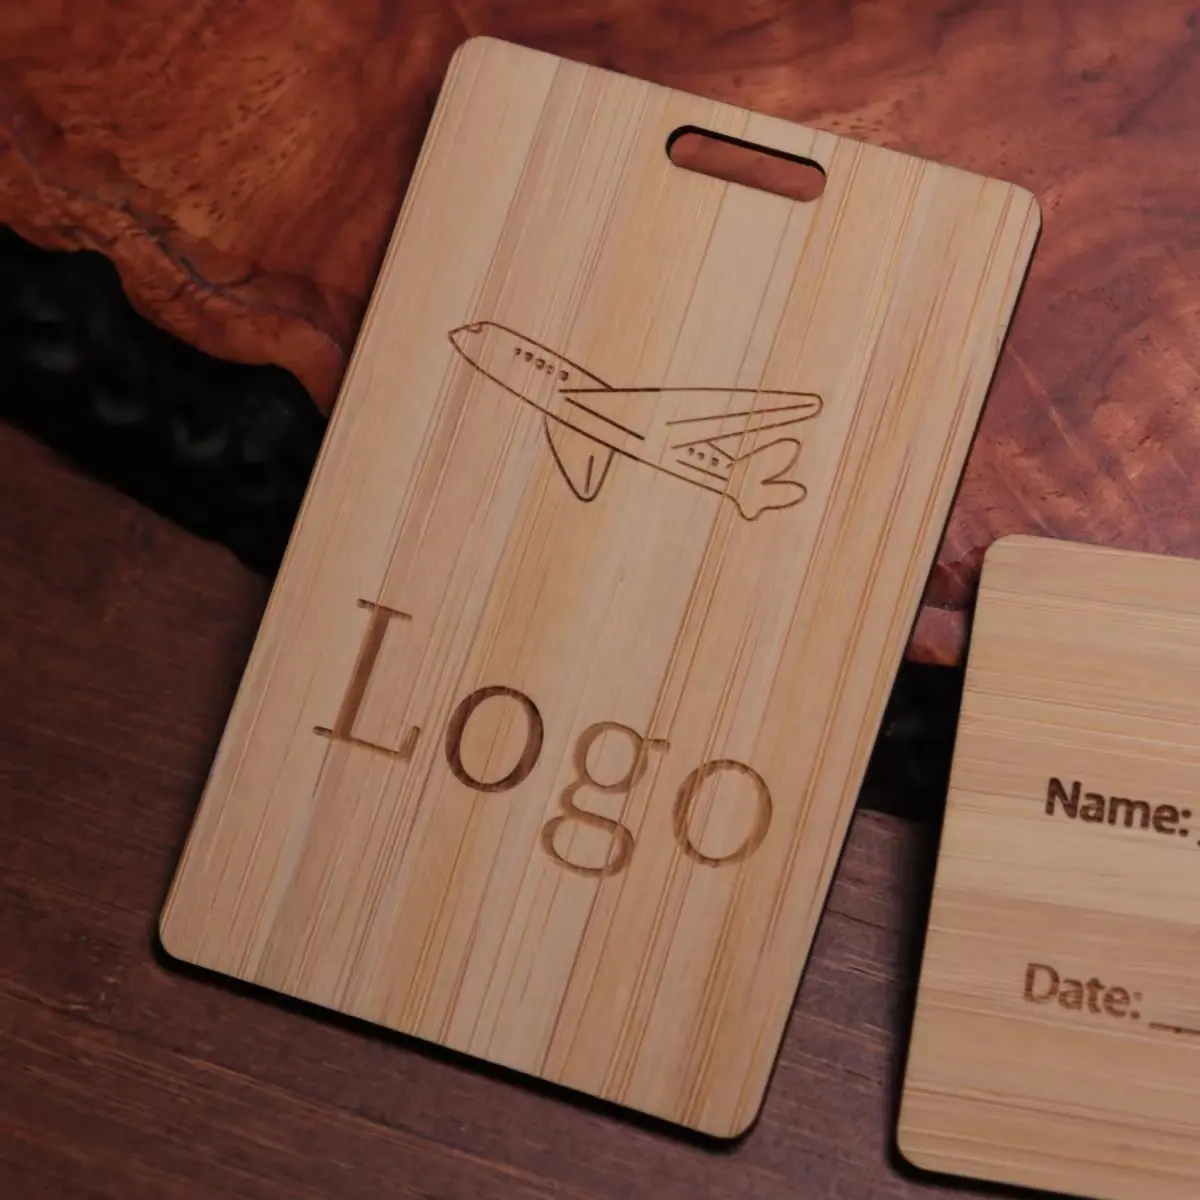 Wholesale Personalized Gift Name Tag Blank Wood Crafts Wooden Honeymoon Luggage Tags for Engraving